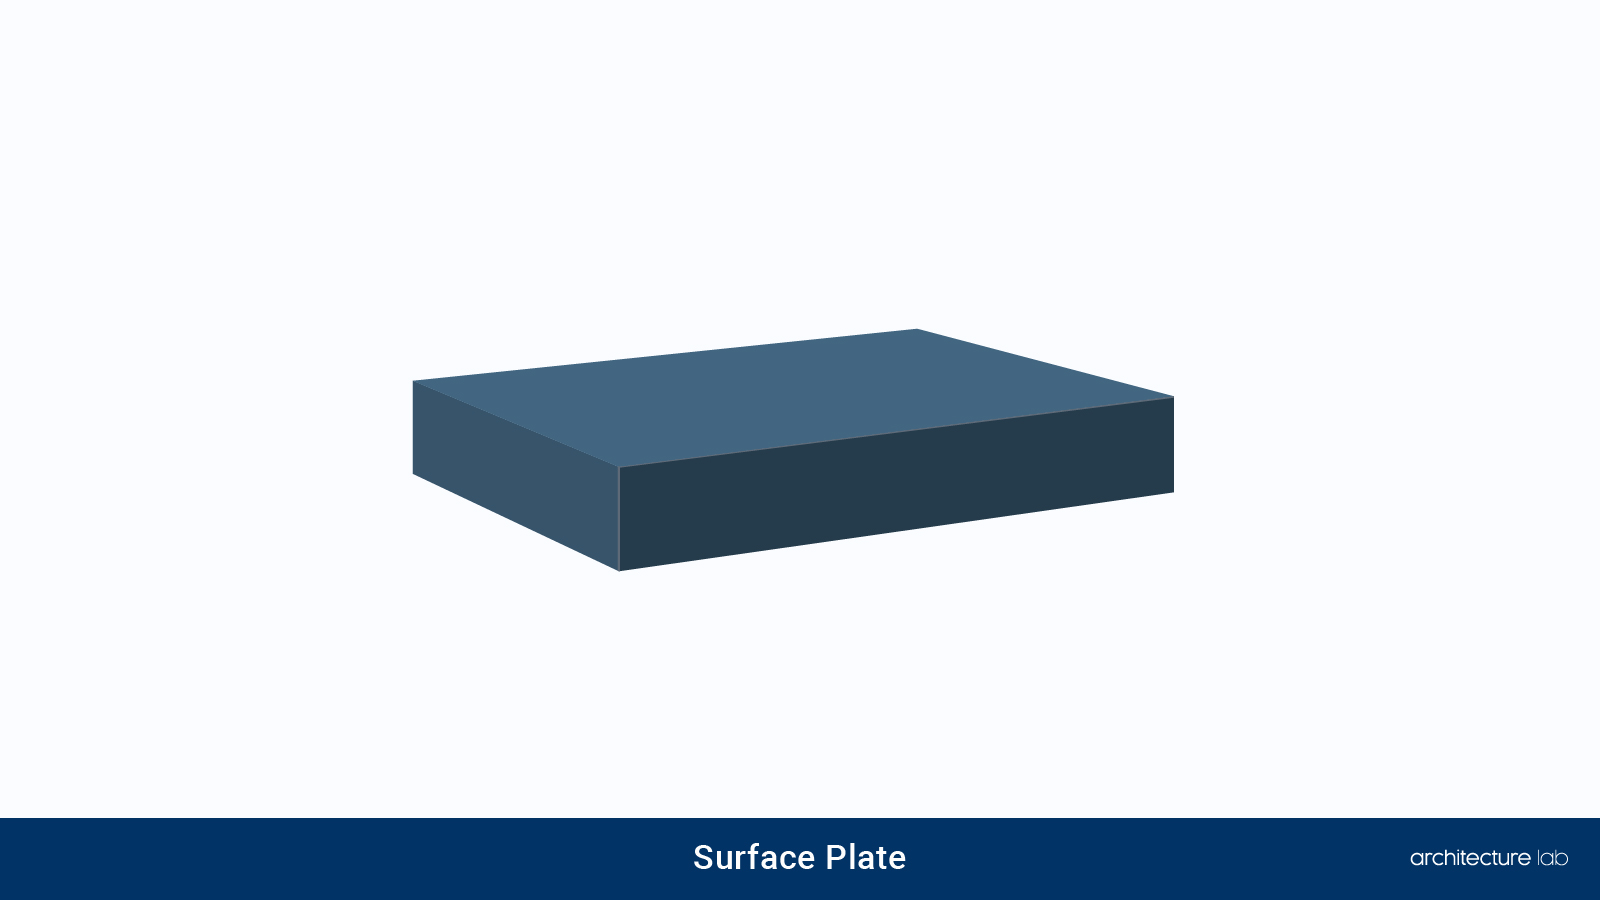 20. Surface plate